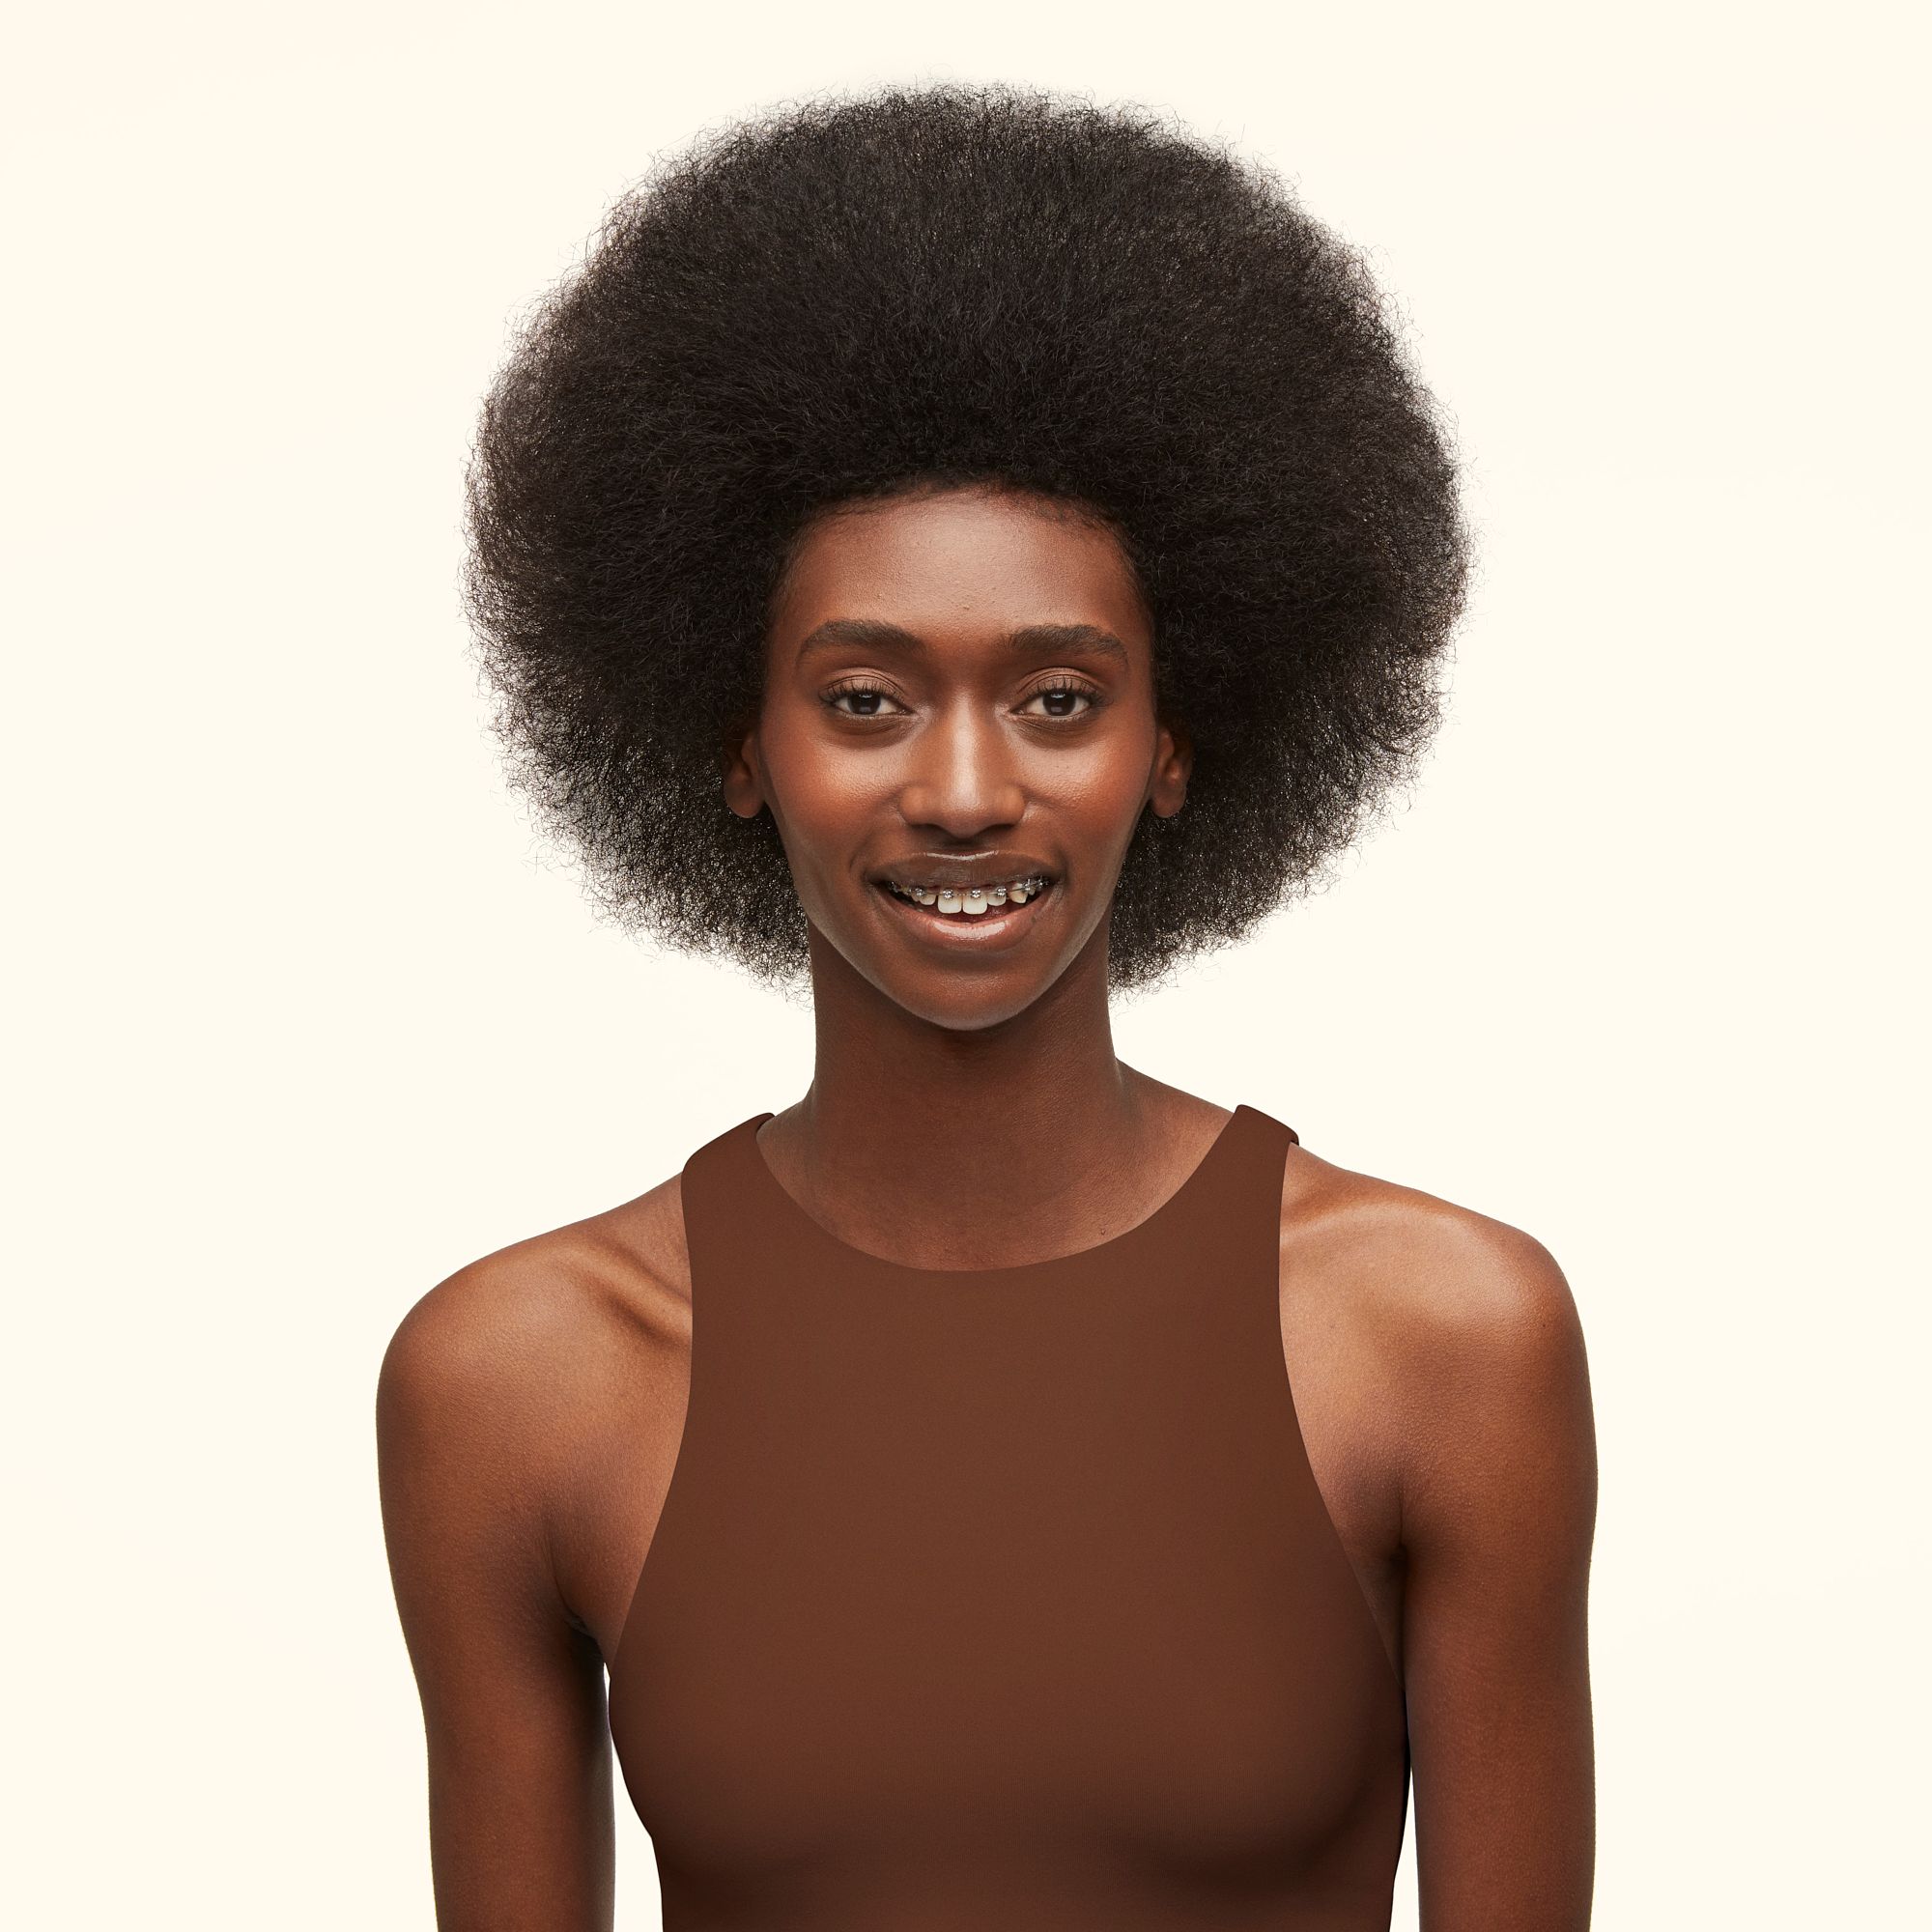 model with highly textured hair type